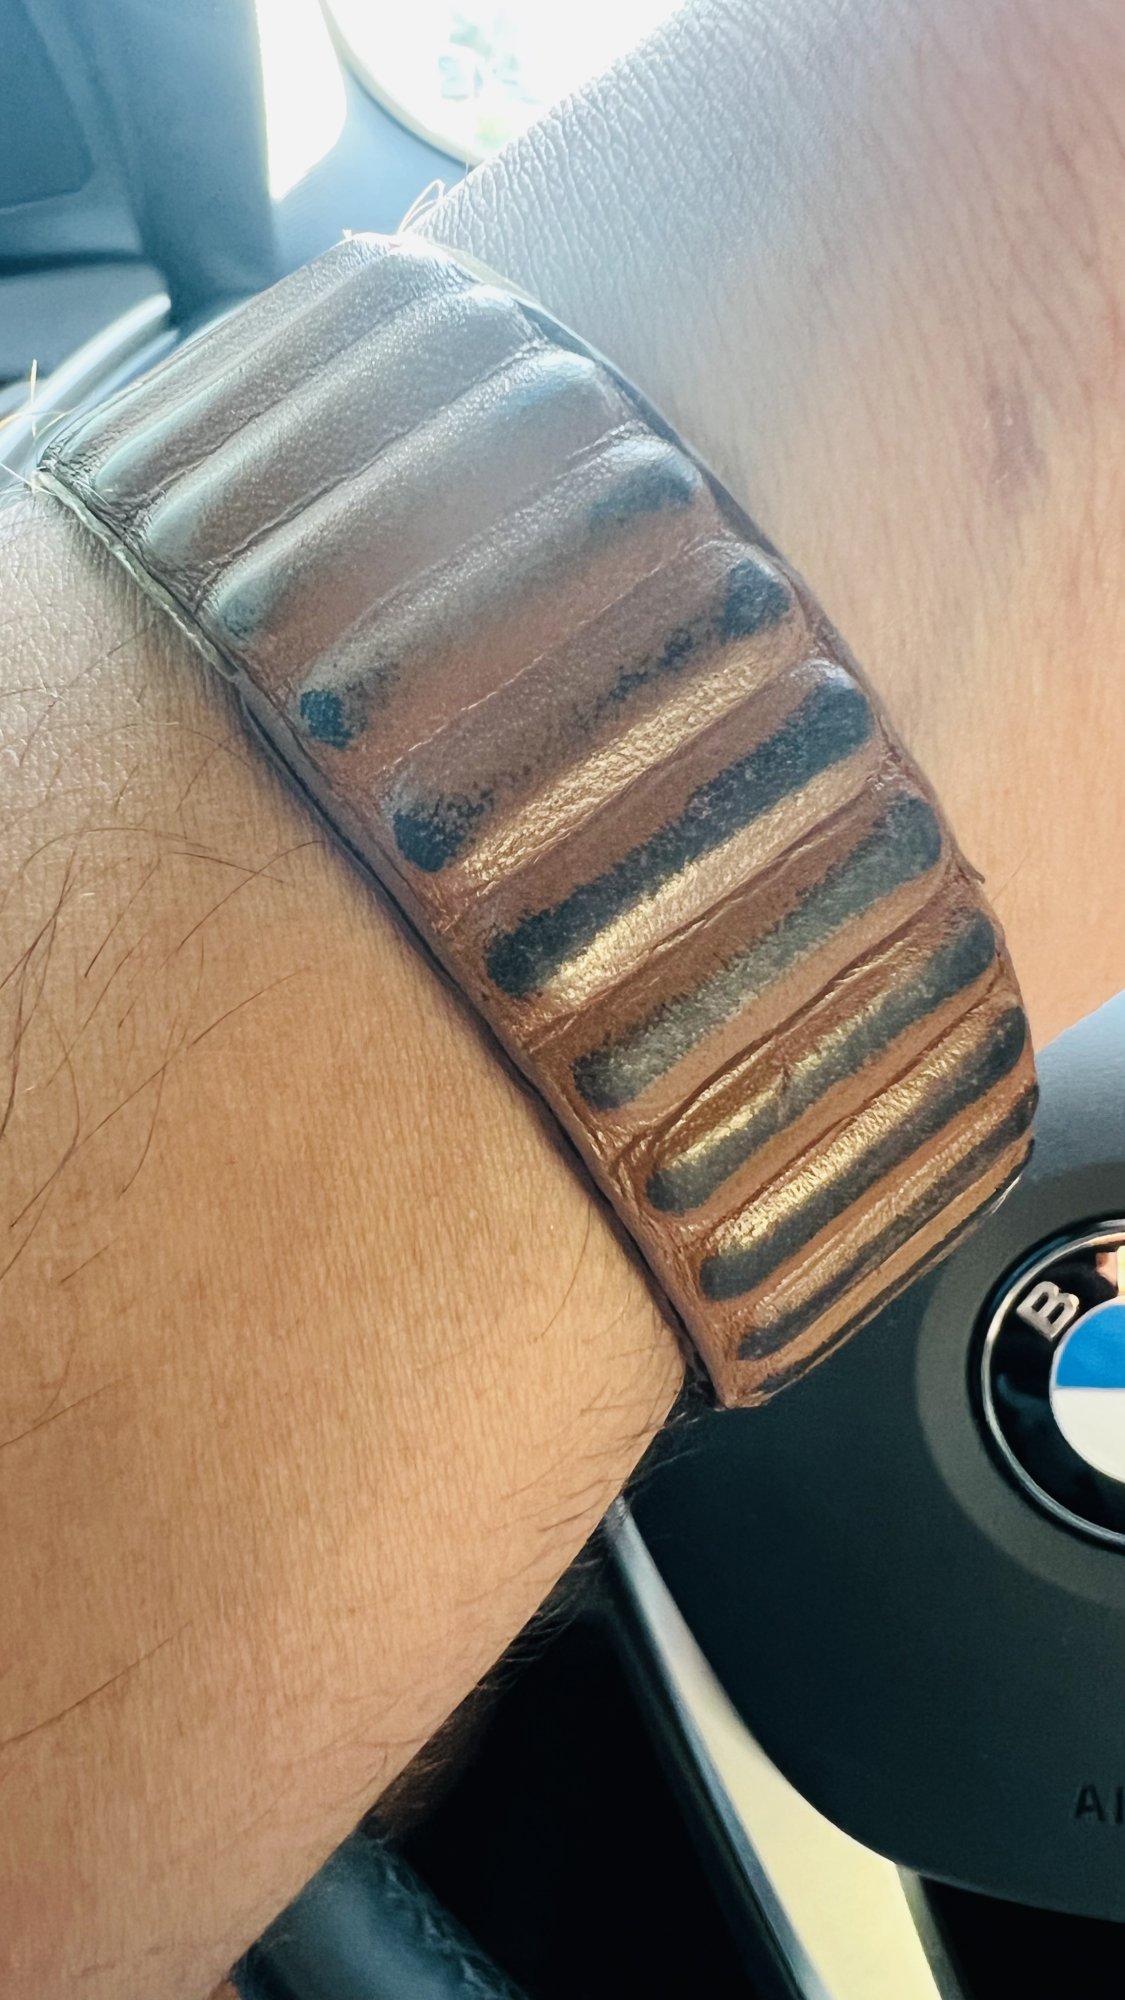 Anyone know how to remove these black marks from apple leather link band?